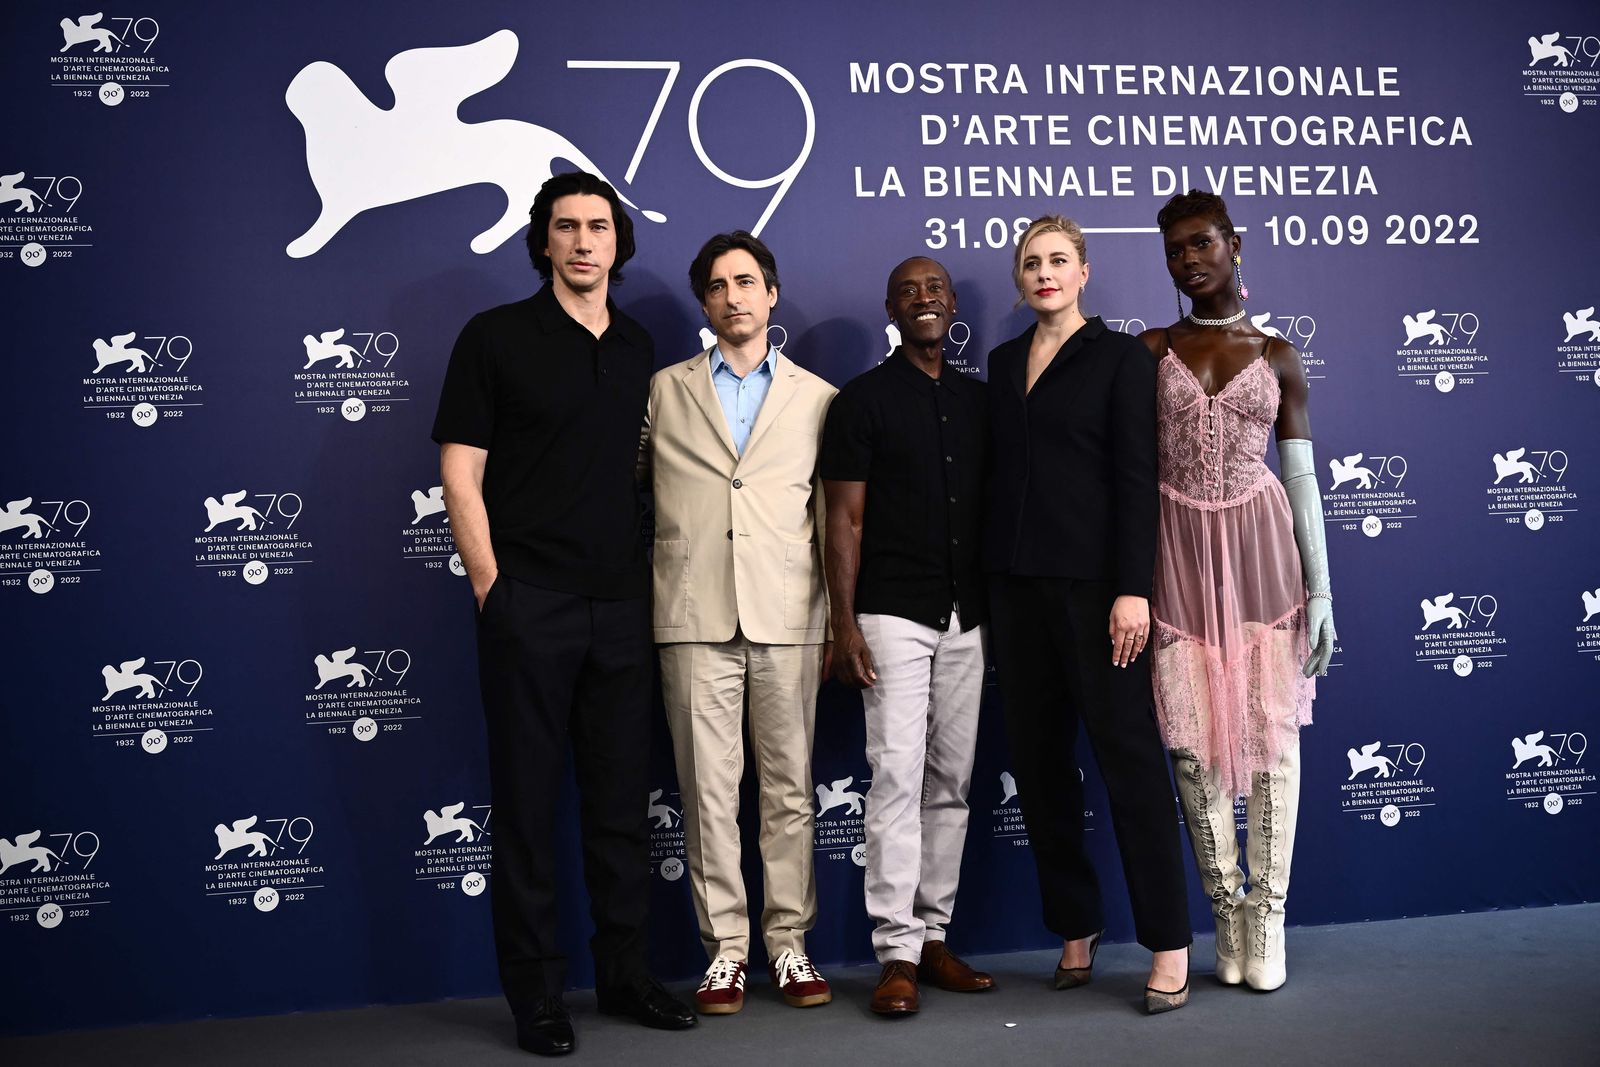 (From L) US actor Adam Driver, US director Noah Baumbach, US actor Don Cheadle, US actress Greta Gerwig and British actress Jodie Turner-Smith pose on August 31, 2022, during a photocall for the film 